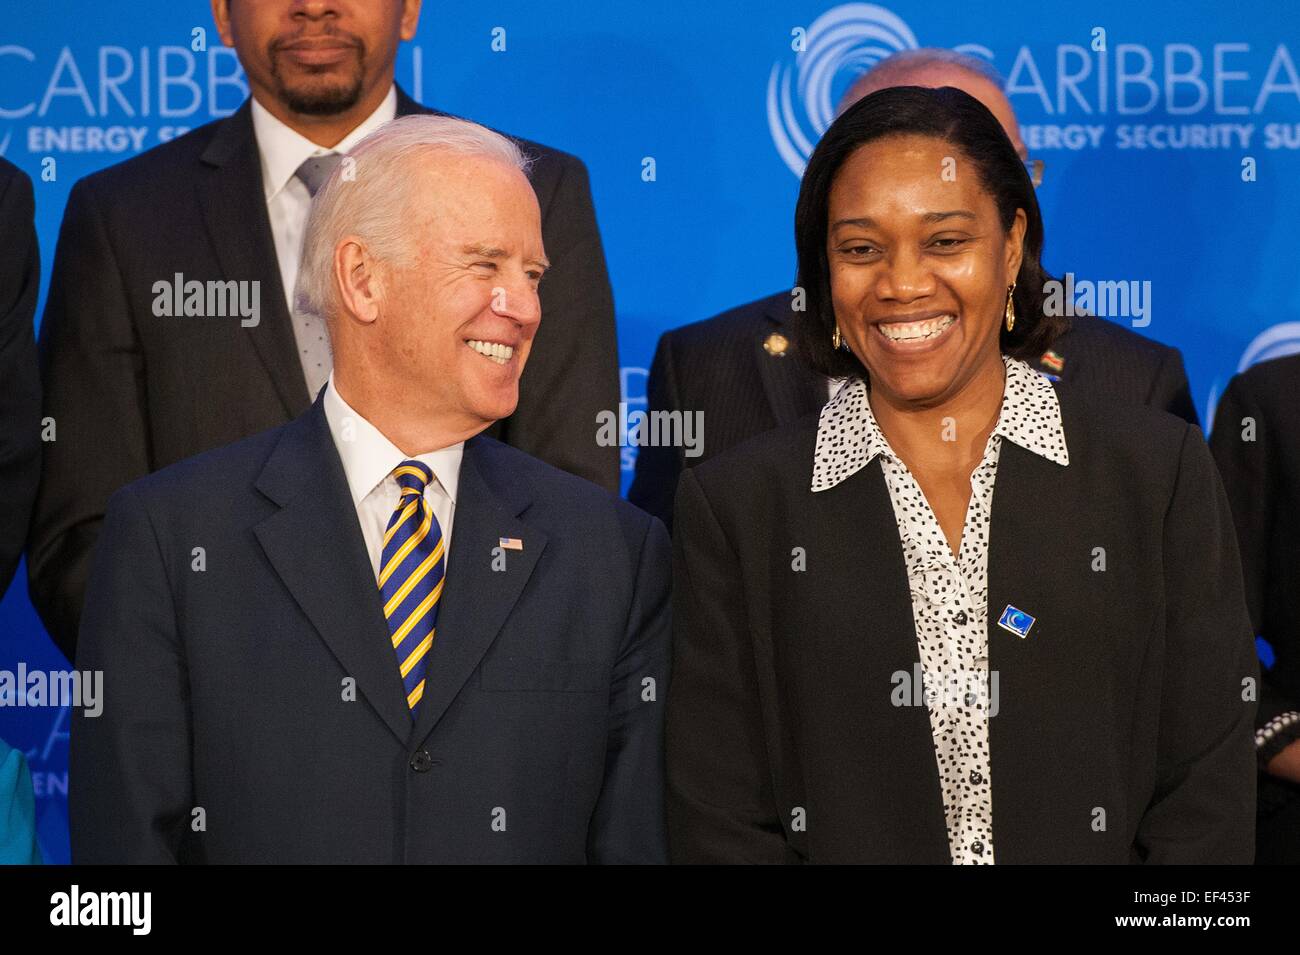 Washington DC, USA. 26th January, 2015. US Vice President Joe Biden talks with Dominica Foreign Minister Francine Baron during a group photo at the Caribbean Energy Security Summit at the Department of State January 26, 2015 in Washington, D.C. Credit:  Planetpix/Alamy Live News Stock Photo